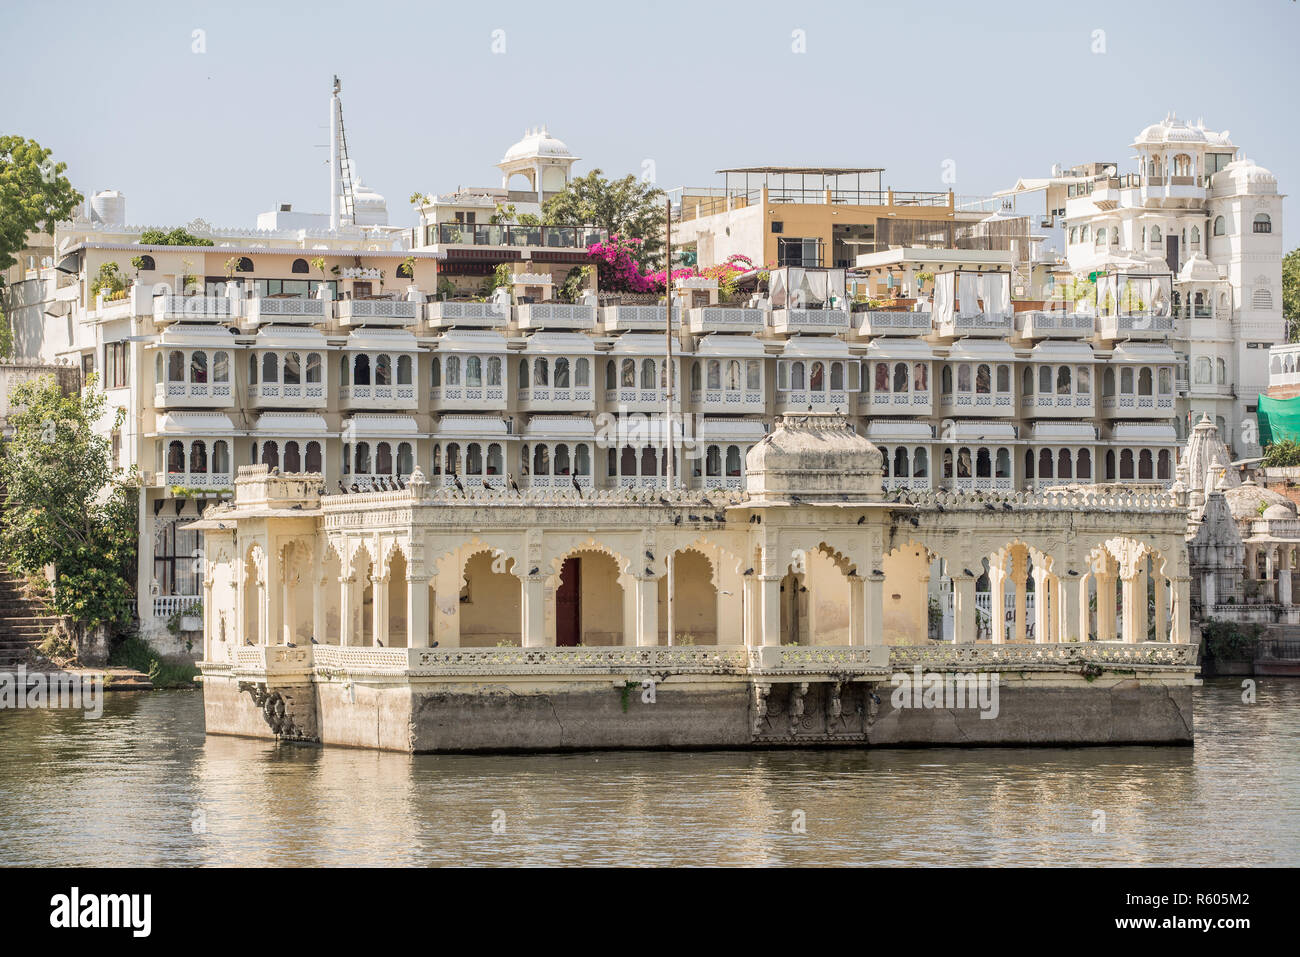 Mohan Mandir Temple with Lake Pichola Hotel in the background, Udaipur, Rajasthan, India Stock Photo